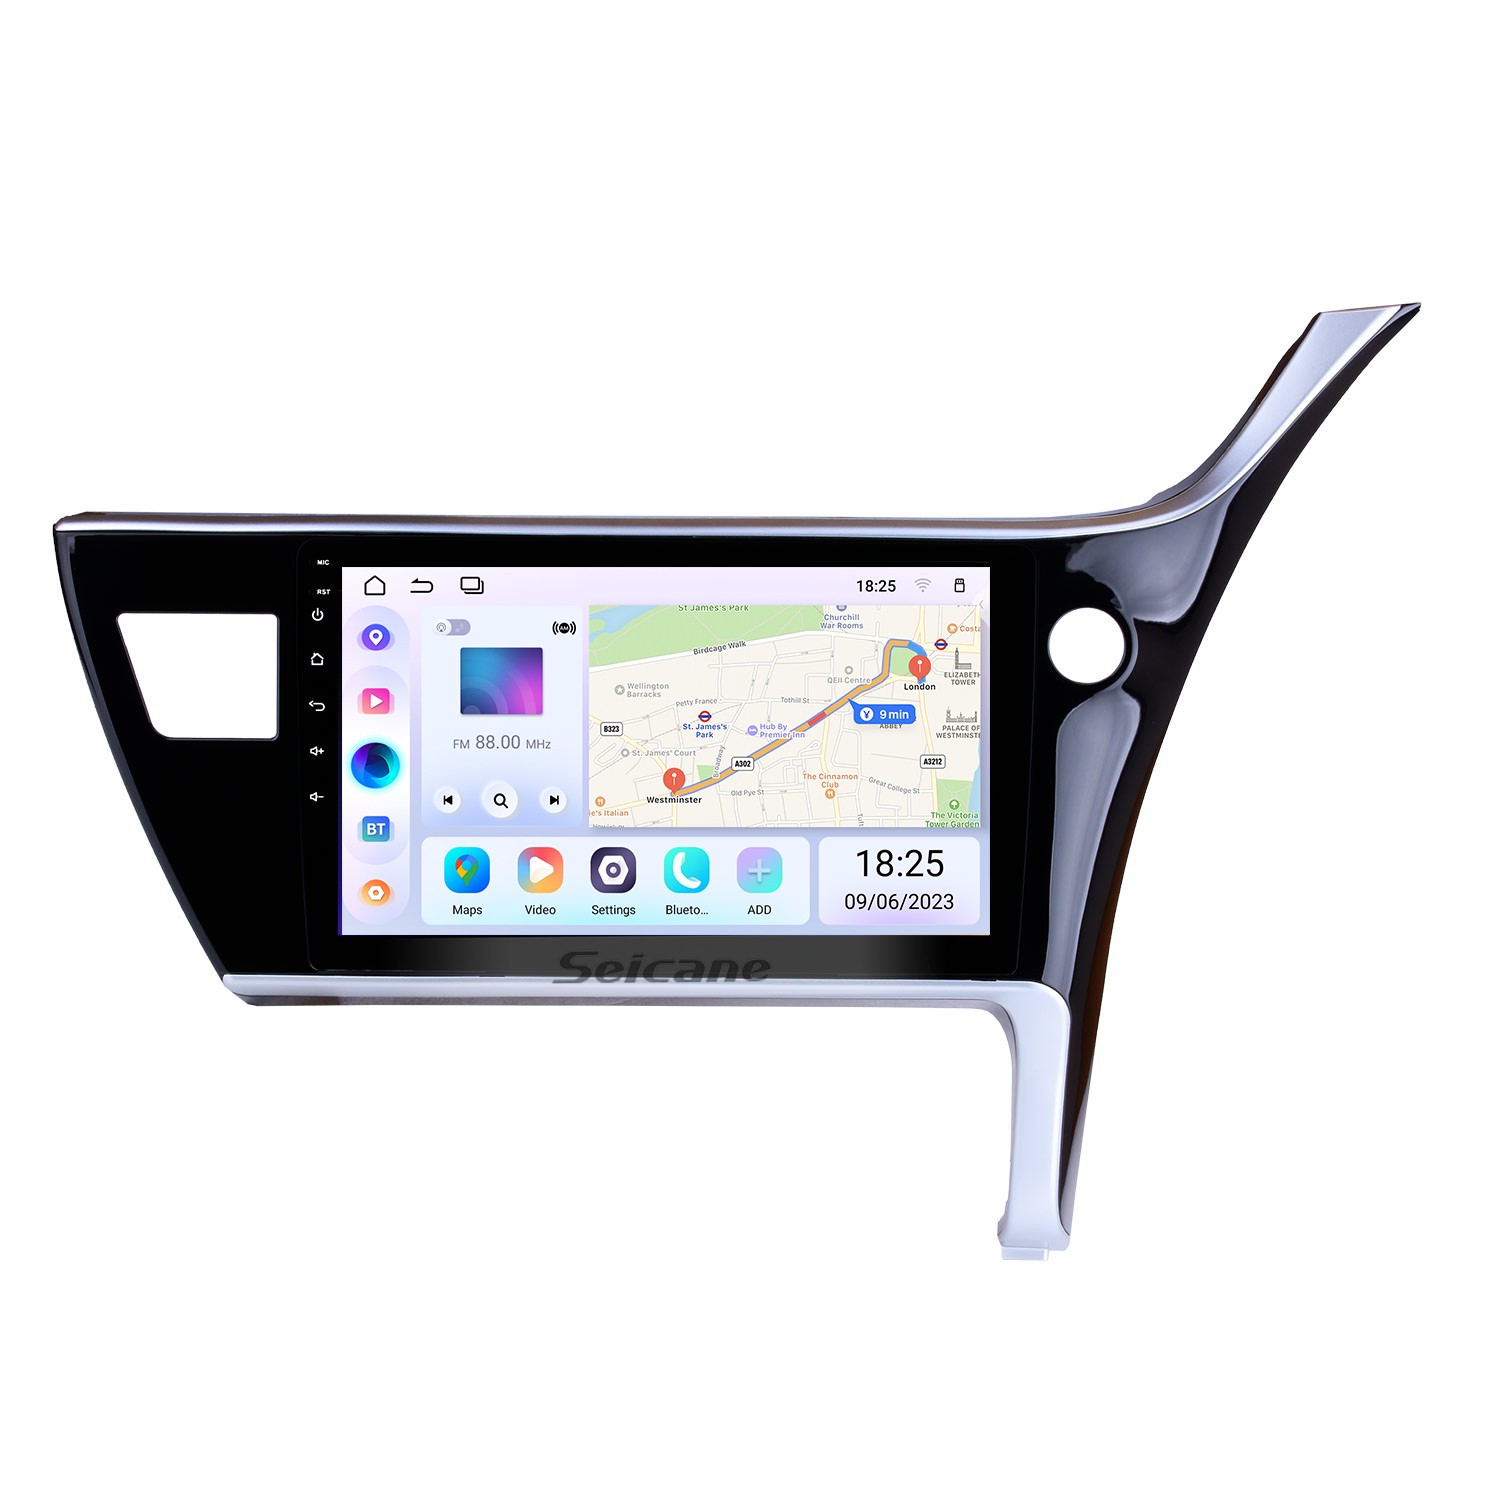 2Din Android 10 10.1 Car Stereo Head Unit GPS Navi Radio WiFi Touch Screen  DAB+